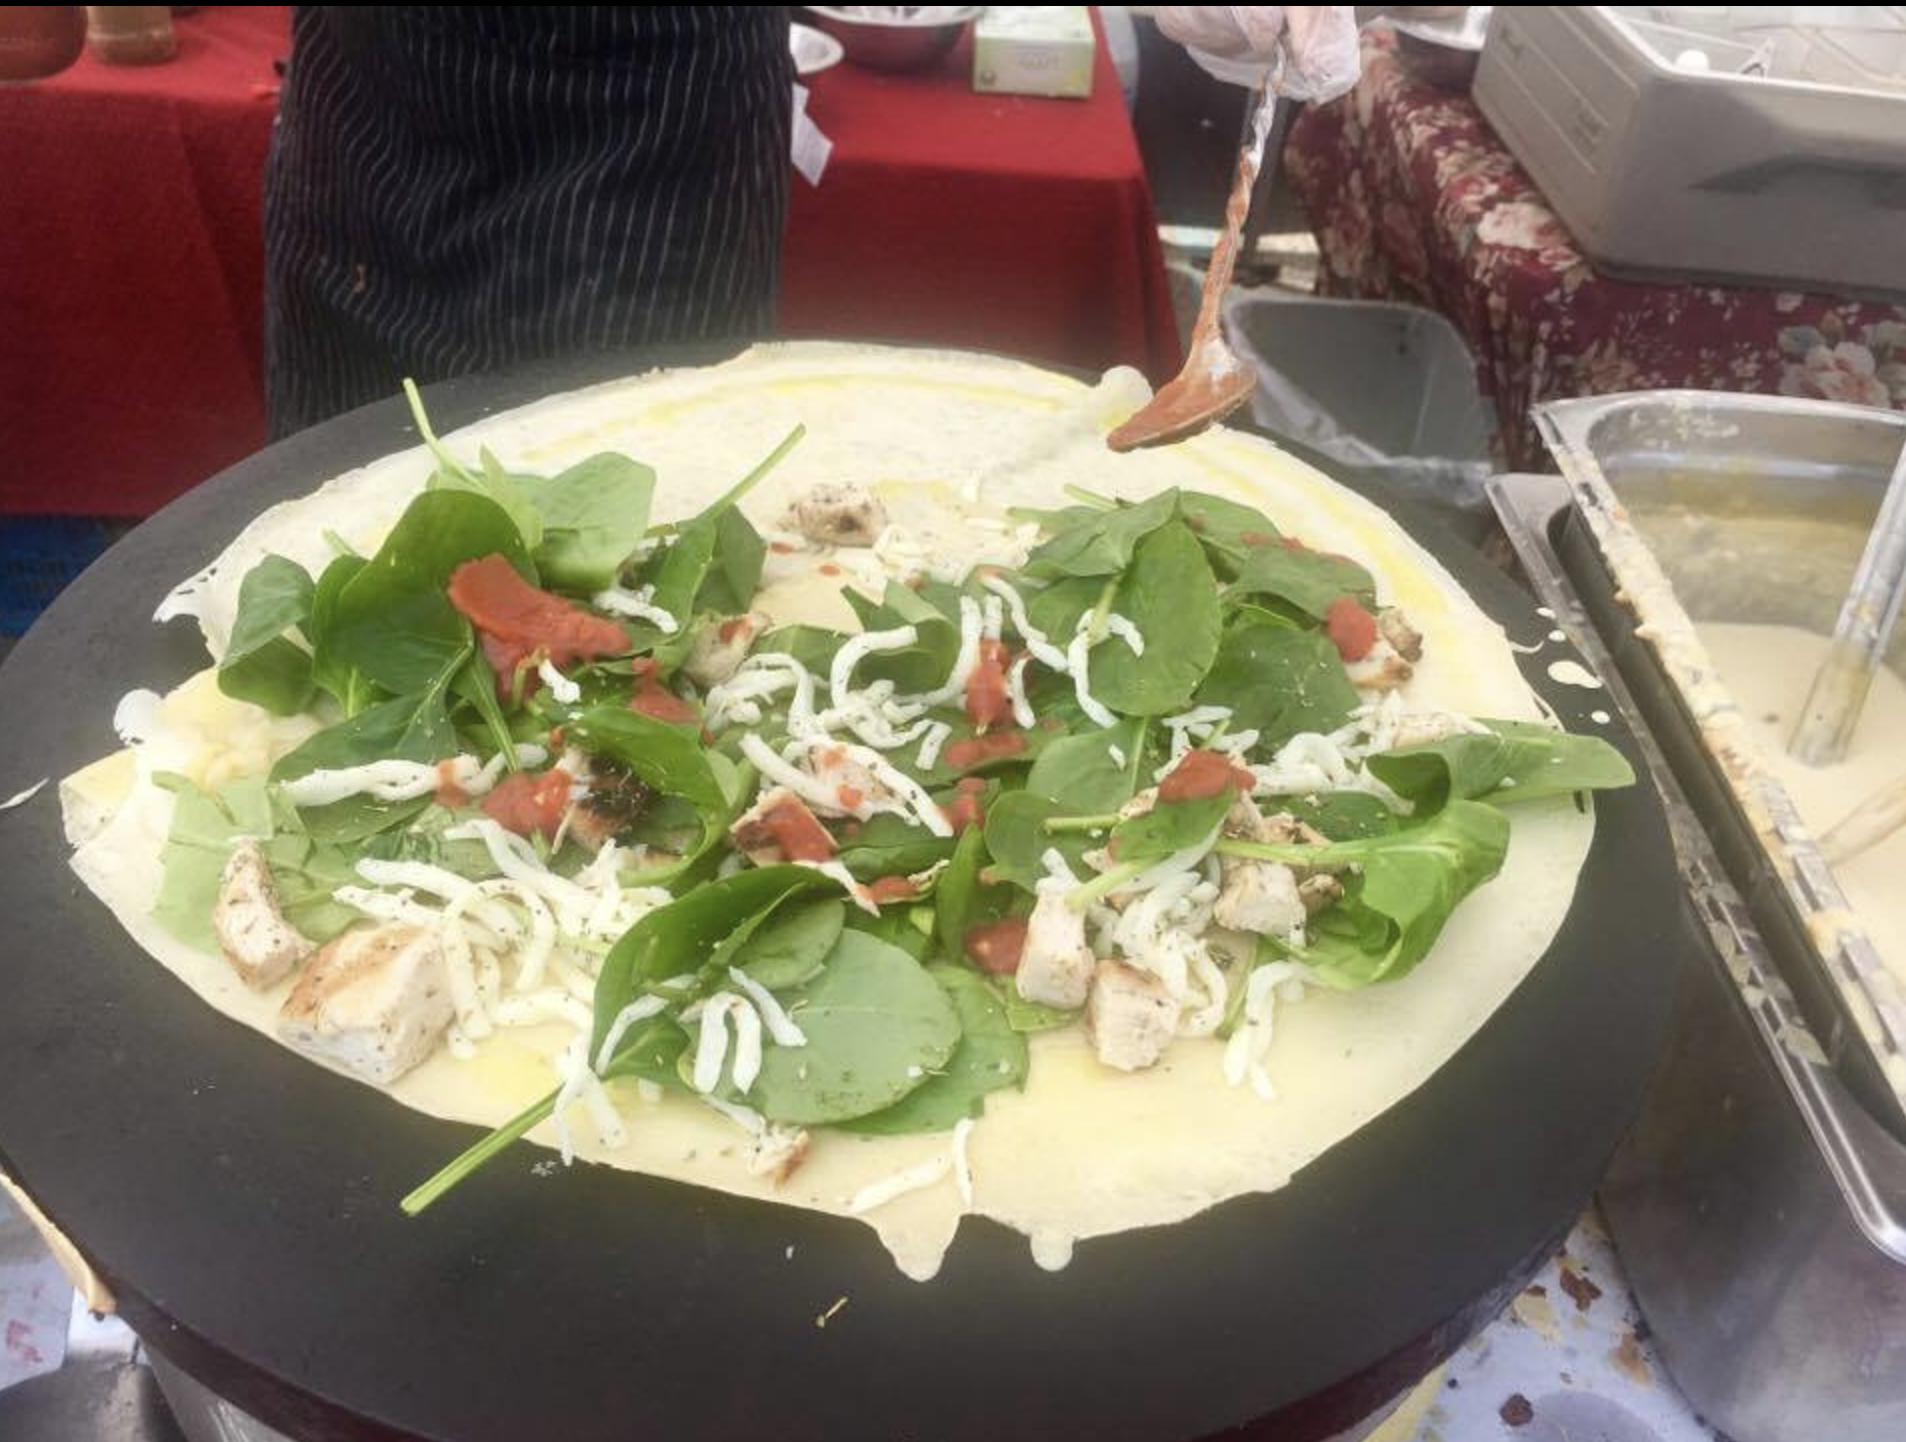 Yummy and freshly-made healthy crepes from Rita's Crepes at "The Market at Potomac Mills" in Woodbridge, Virginia